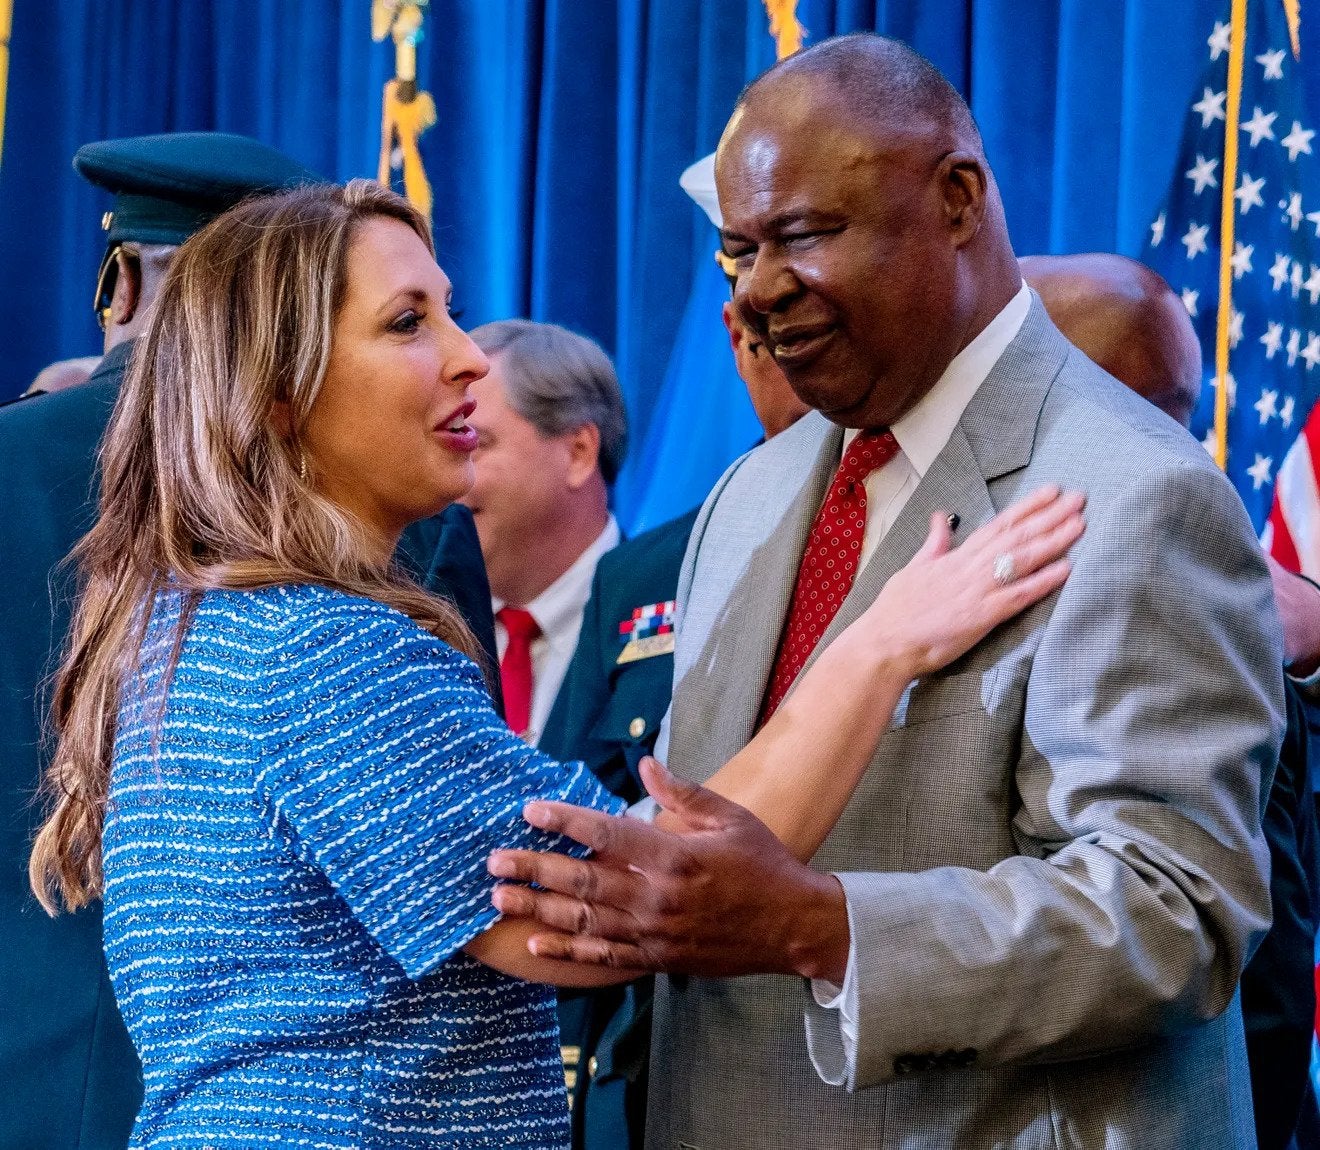 Republican National Committee chair Ronna McDaniel congratulates Gerard Randall, secretary of the Milwaukee Hosting Committee, after the signing of the official document selecting Milwaukee to host the 2024 Republican National Convention